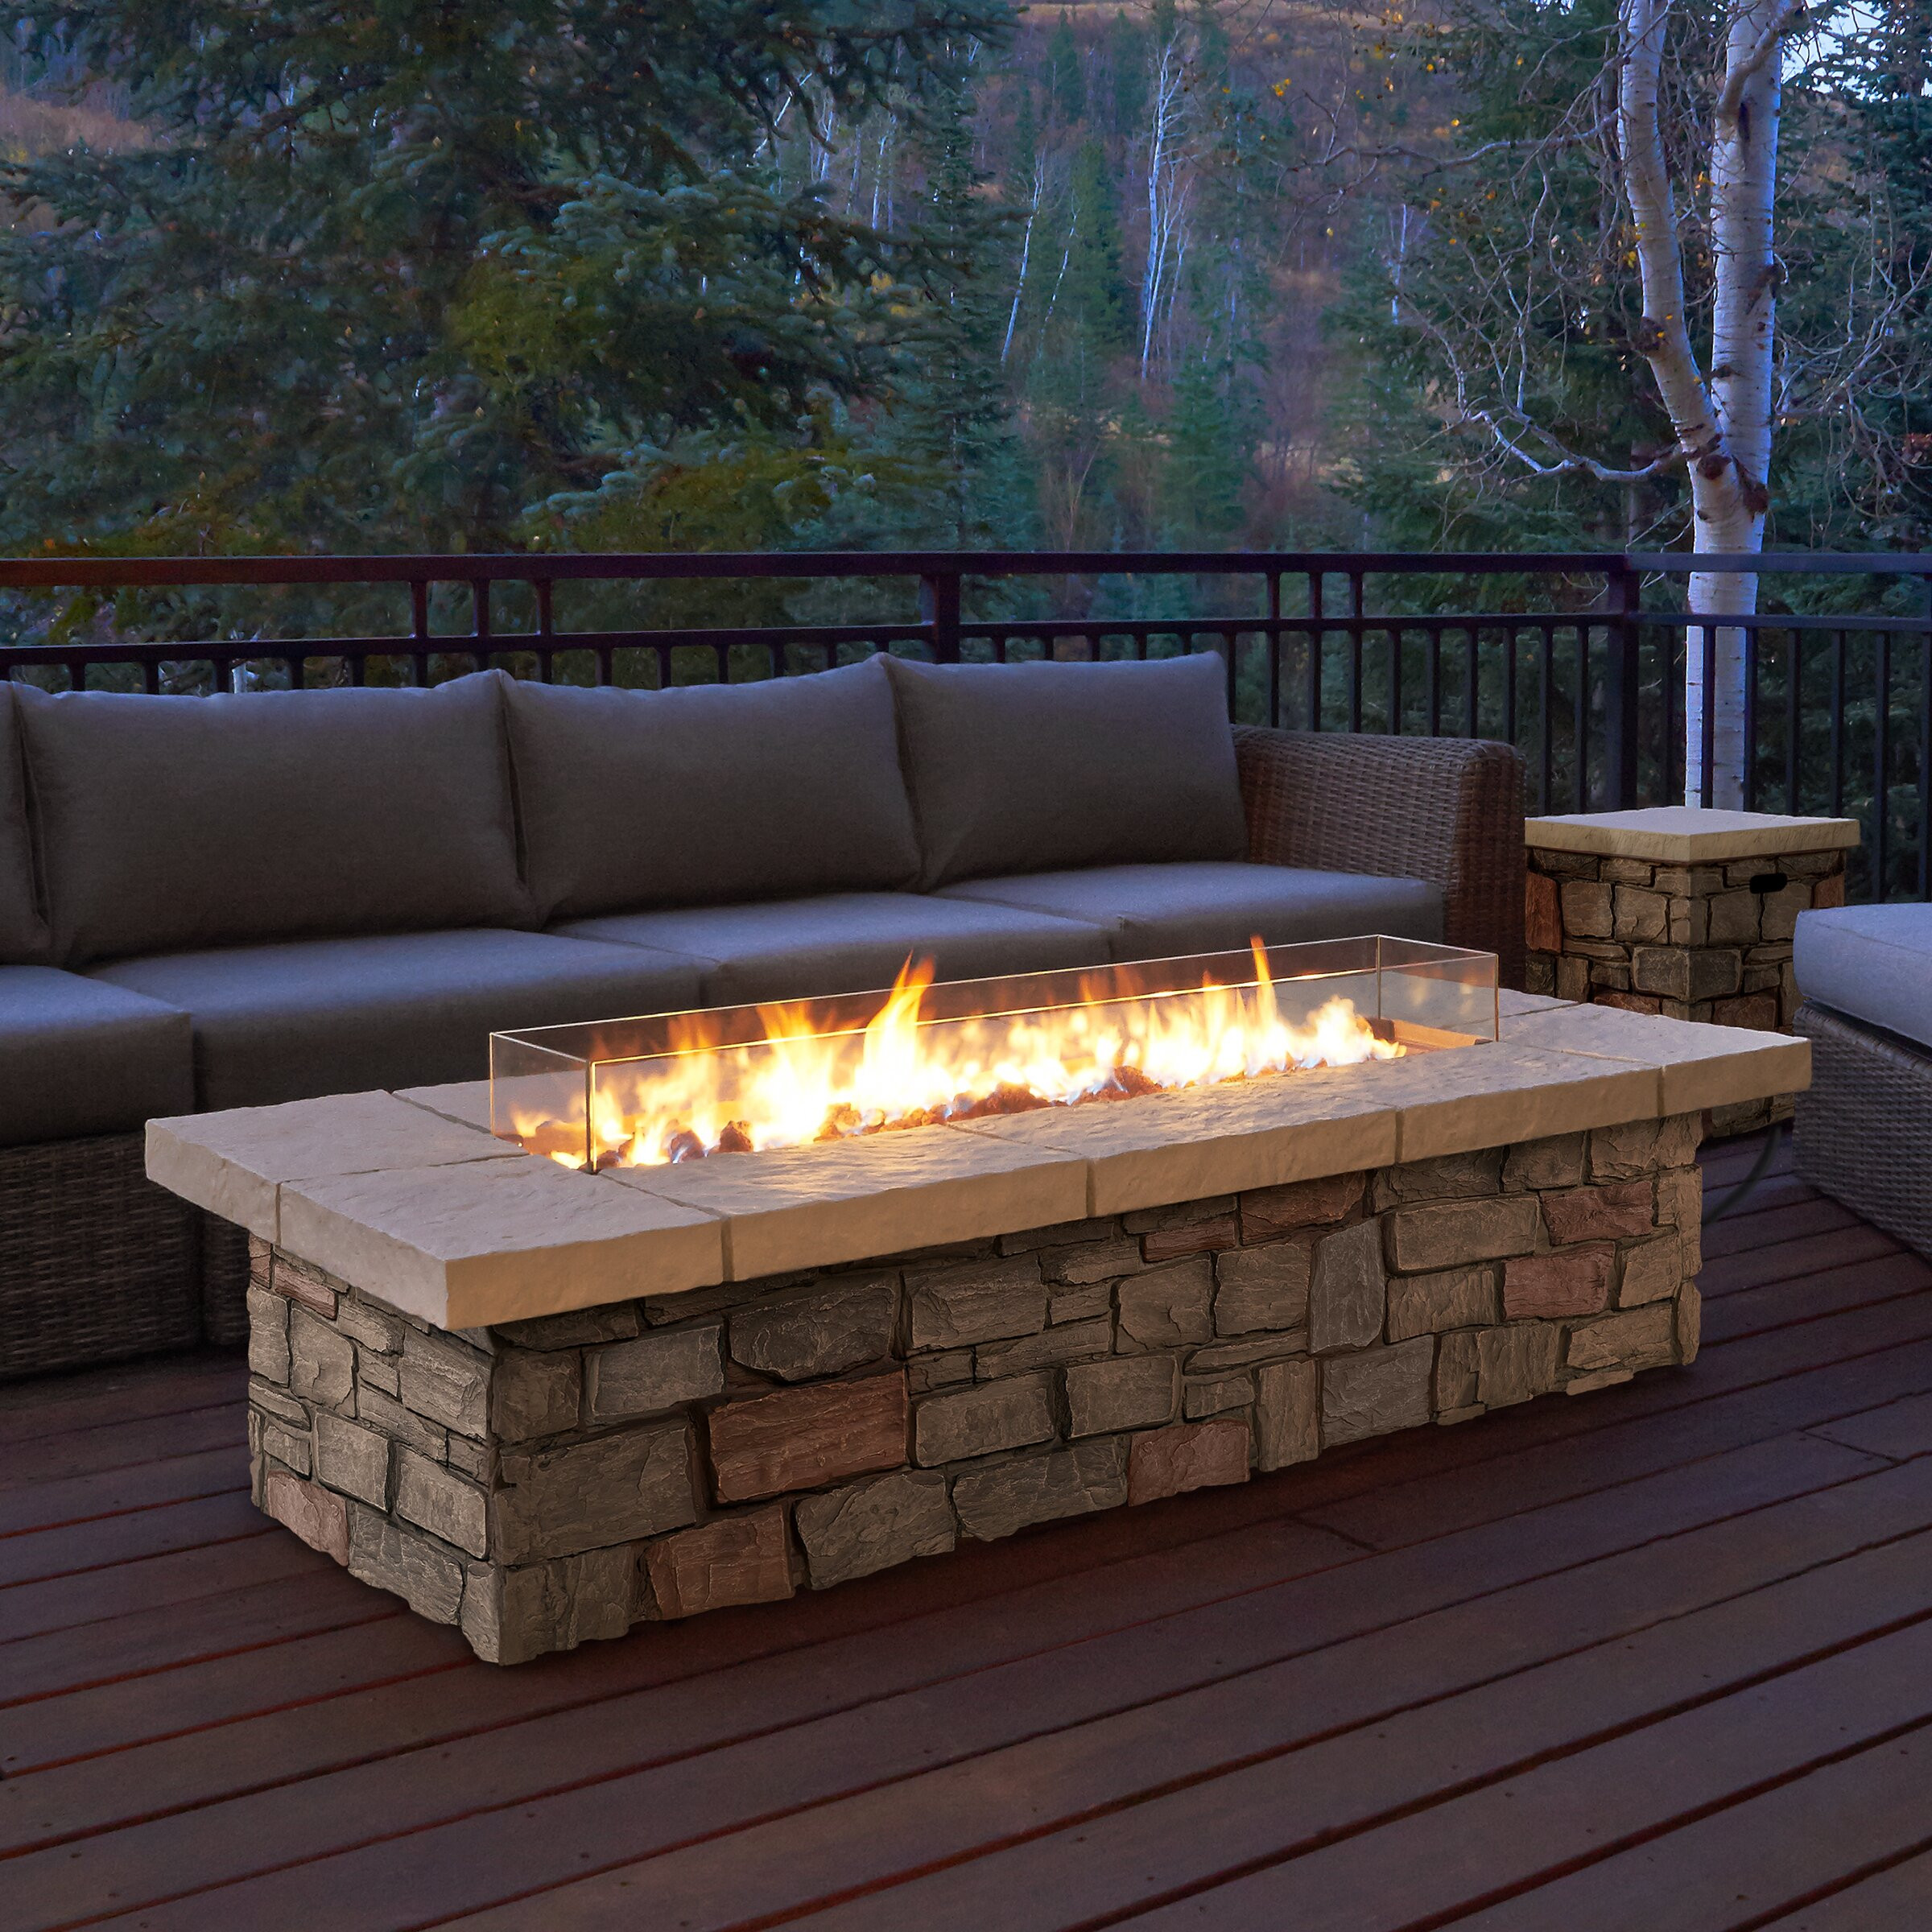 Patio Table With Firepit
 Real Flame Sedona Propane Fire Pit Table & Reviews